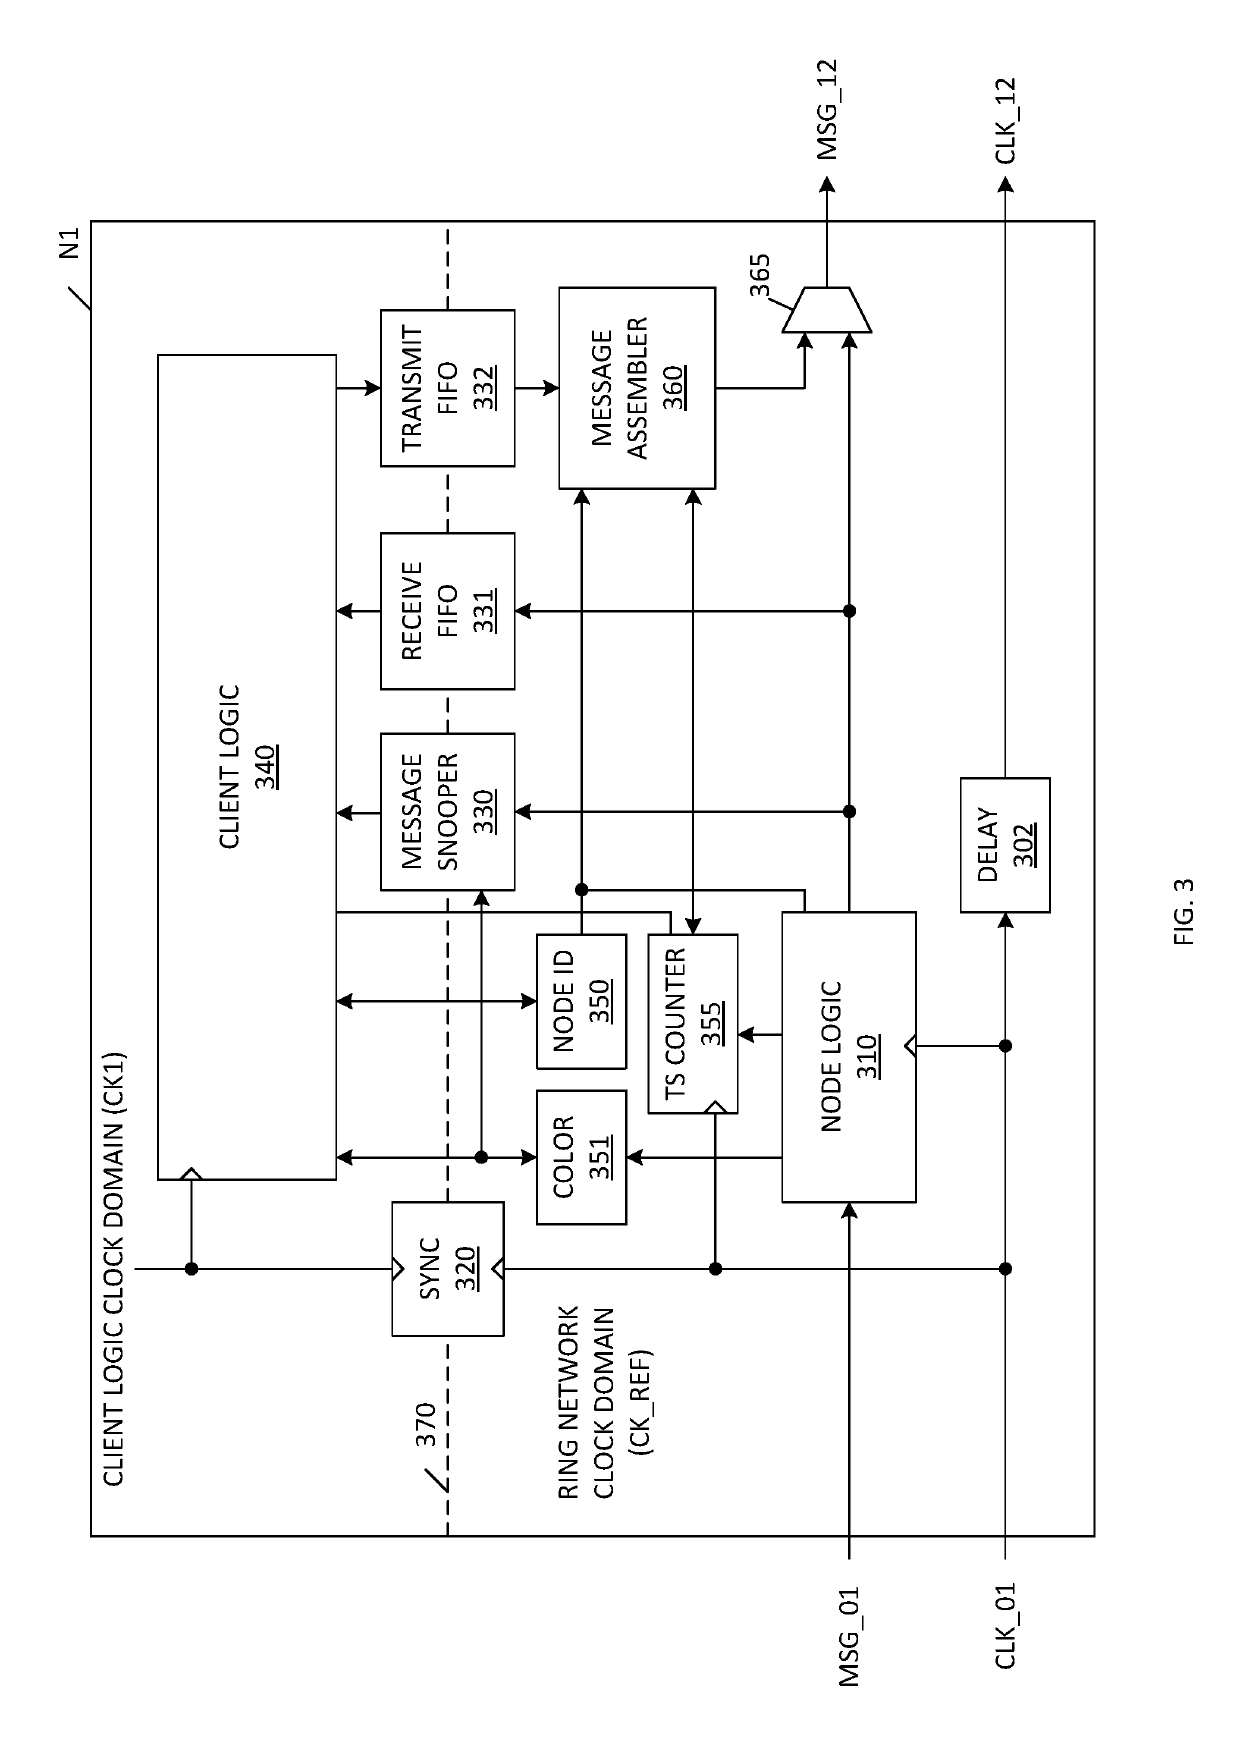 Distributed control synchronized ring network architecture